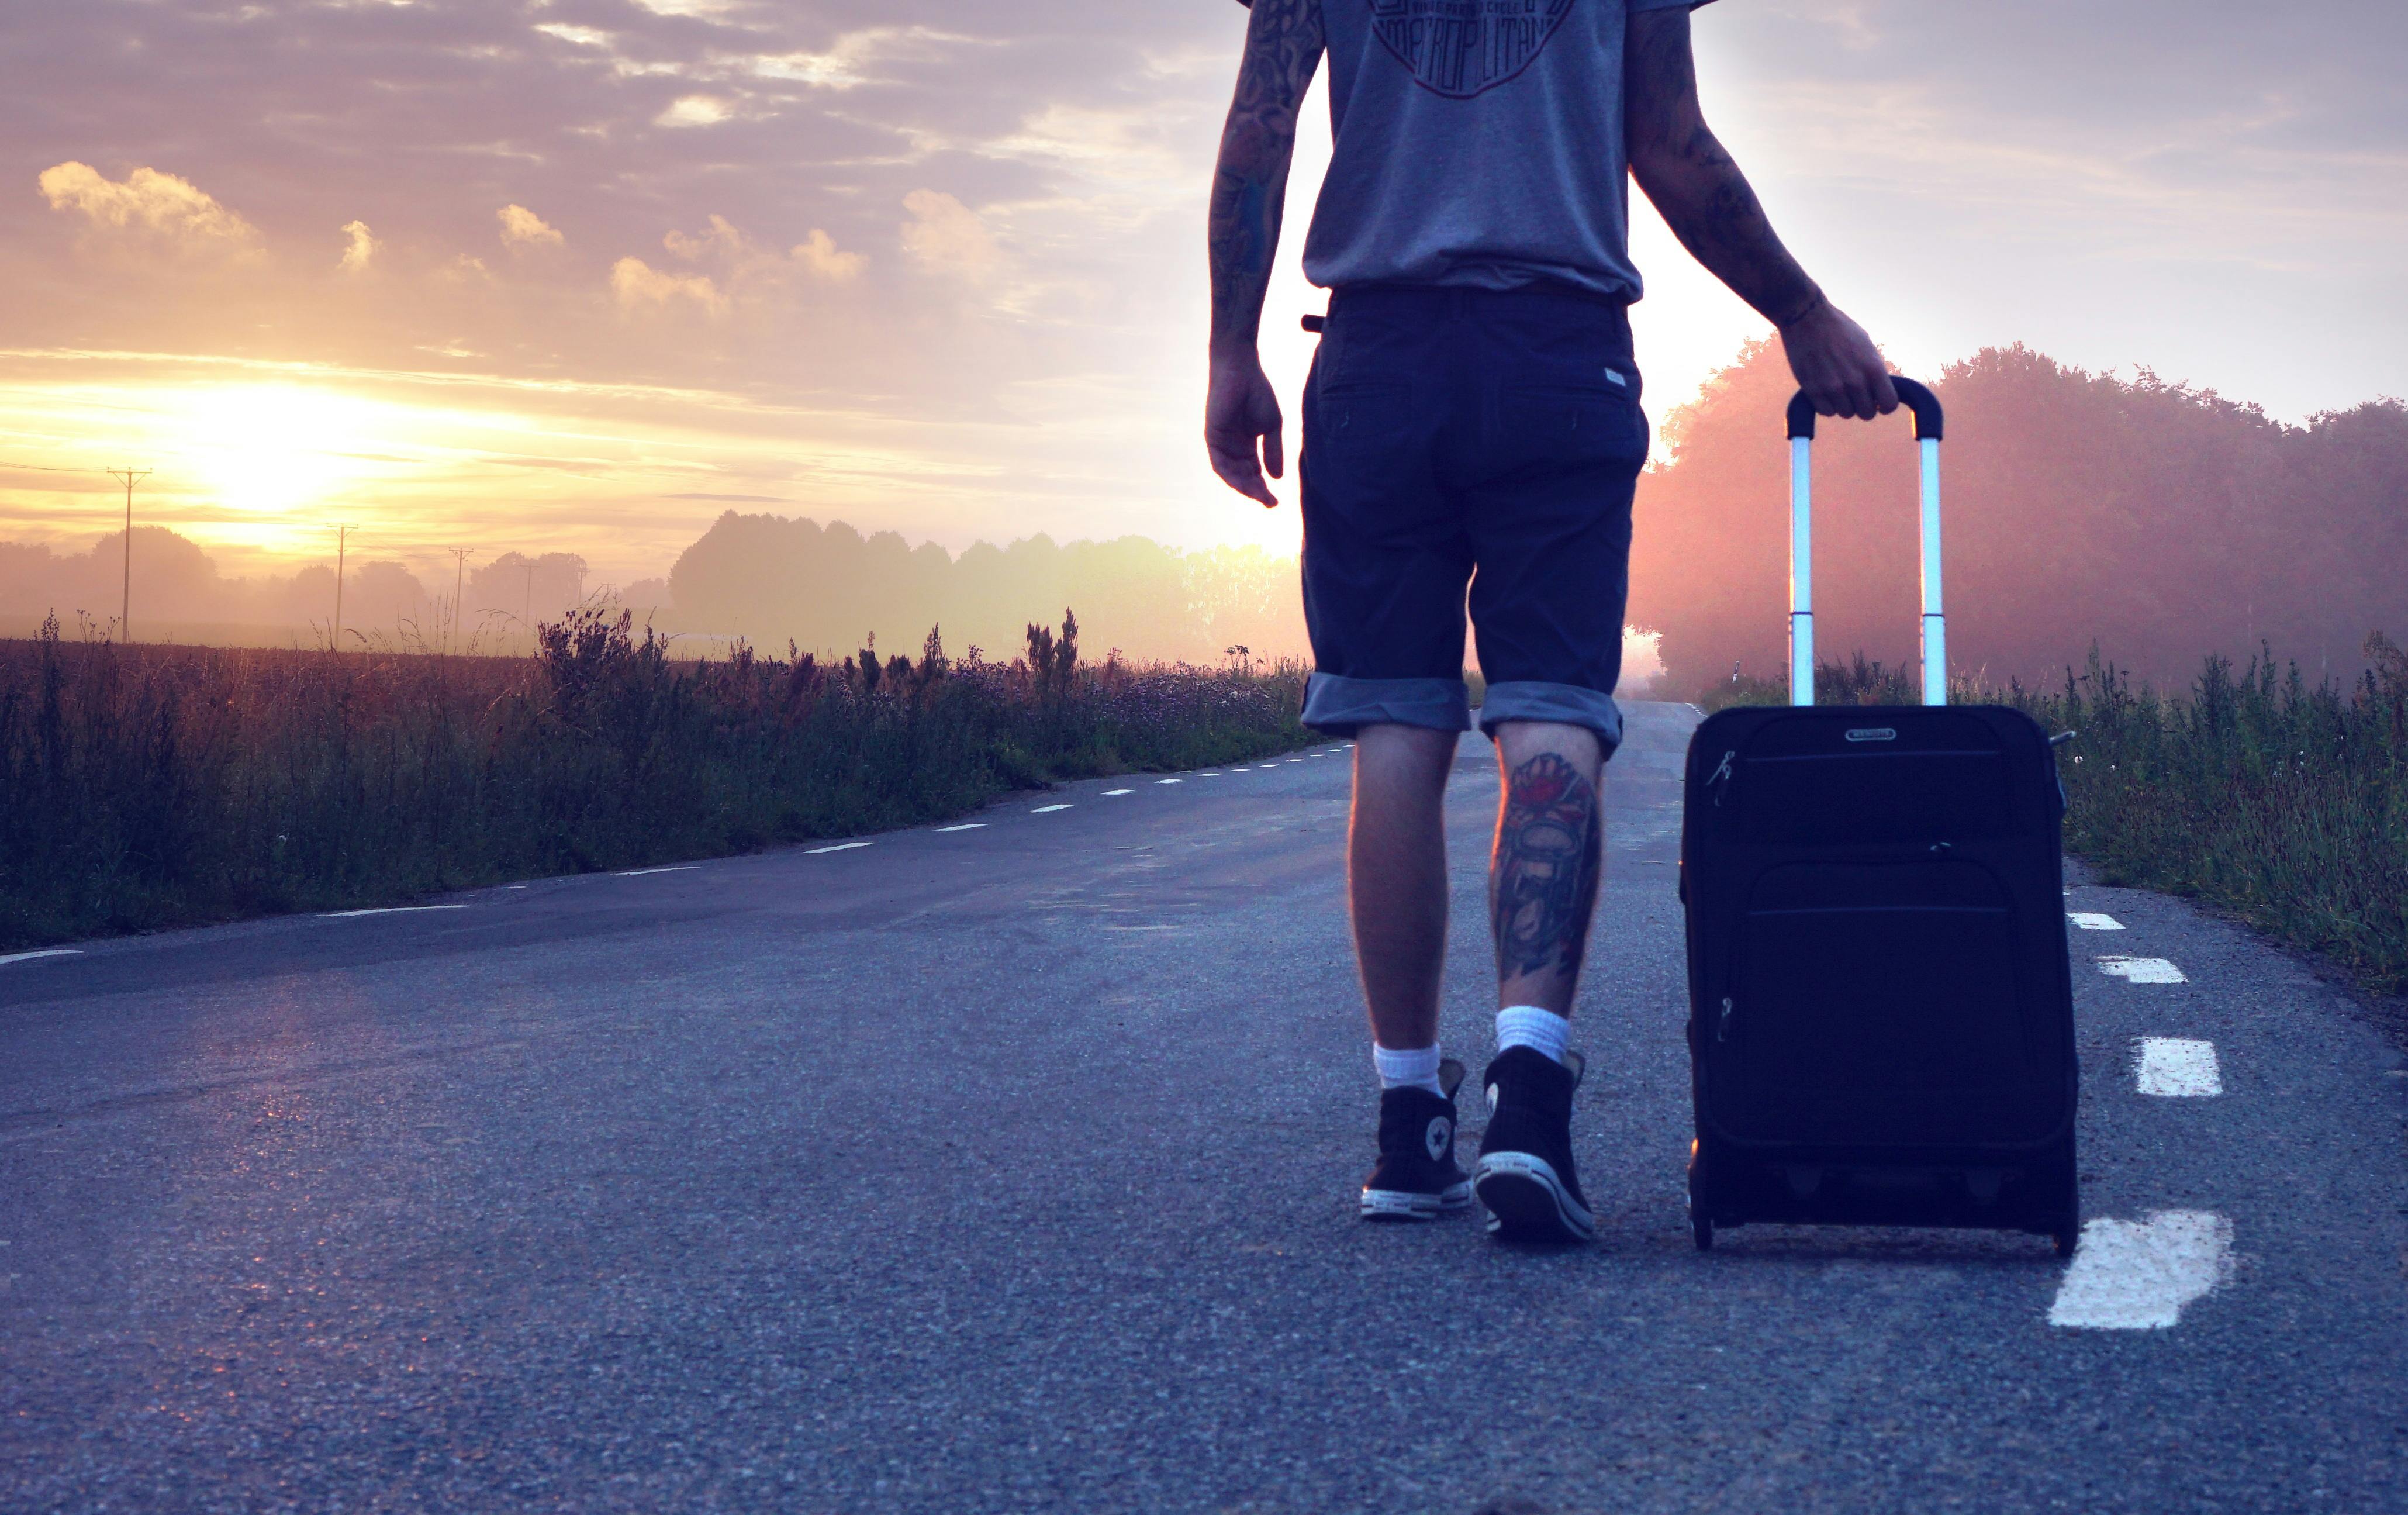 Man with luggage on road during sunset | Source: Pixabay